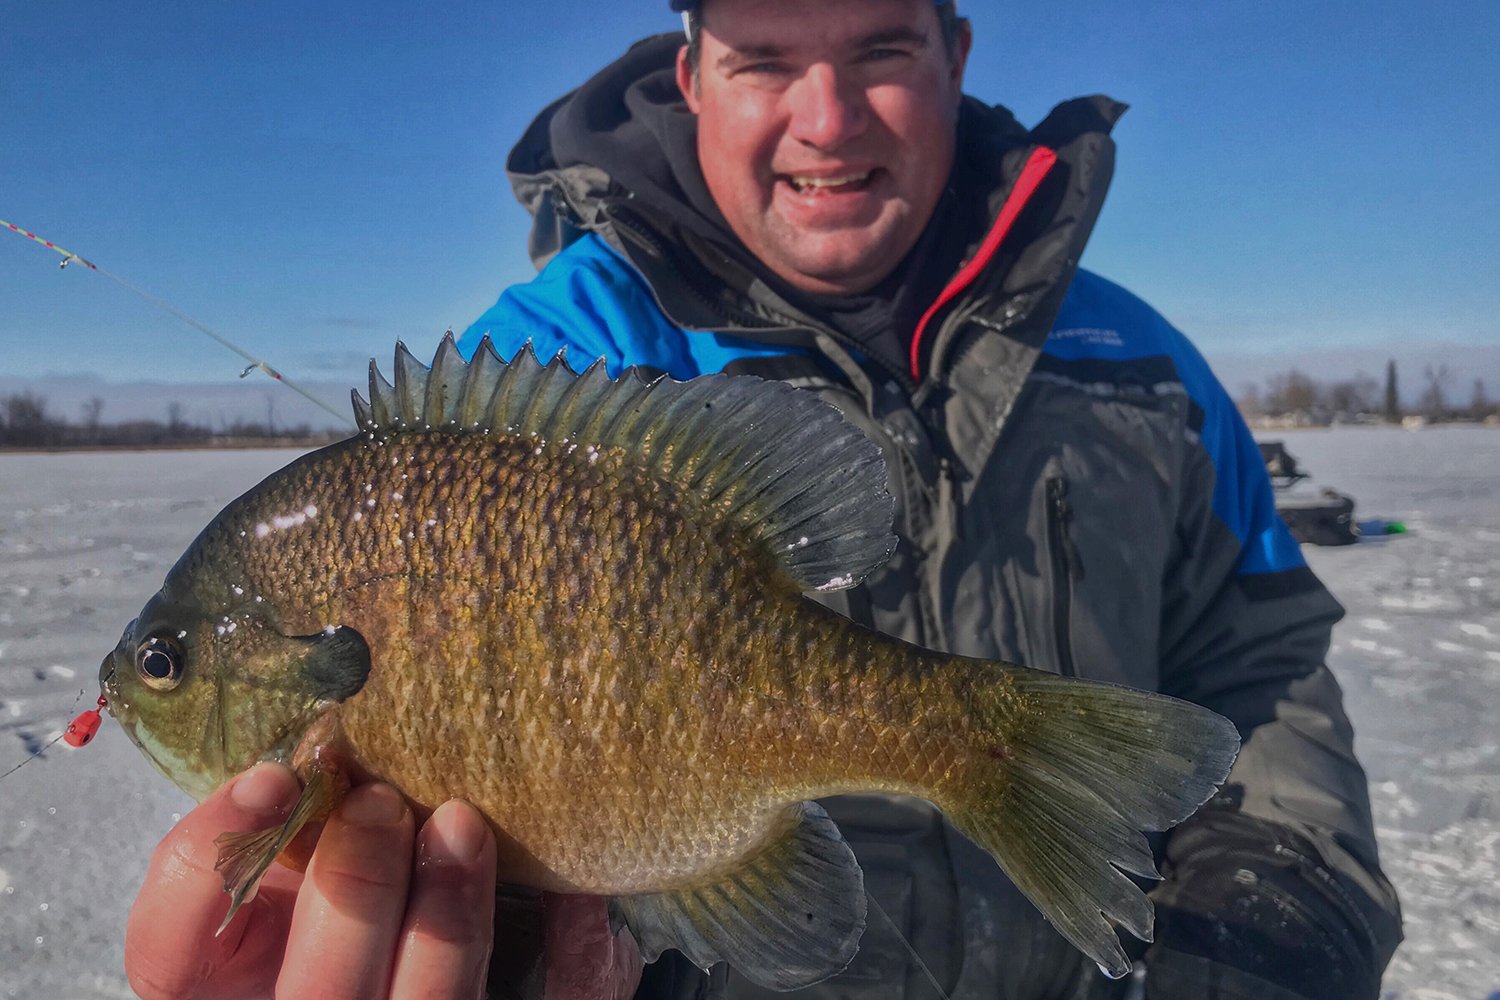 Catching Suspended Panfish in the Abyss